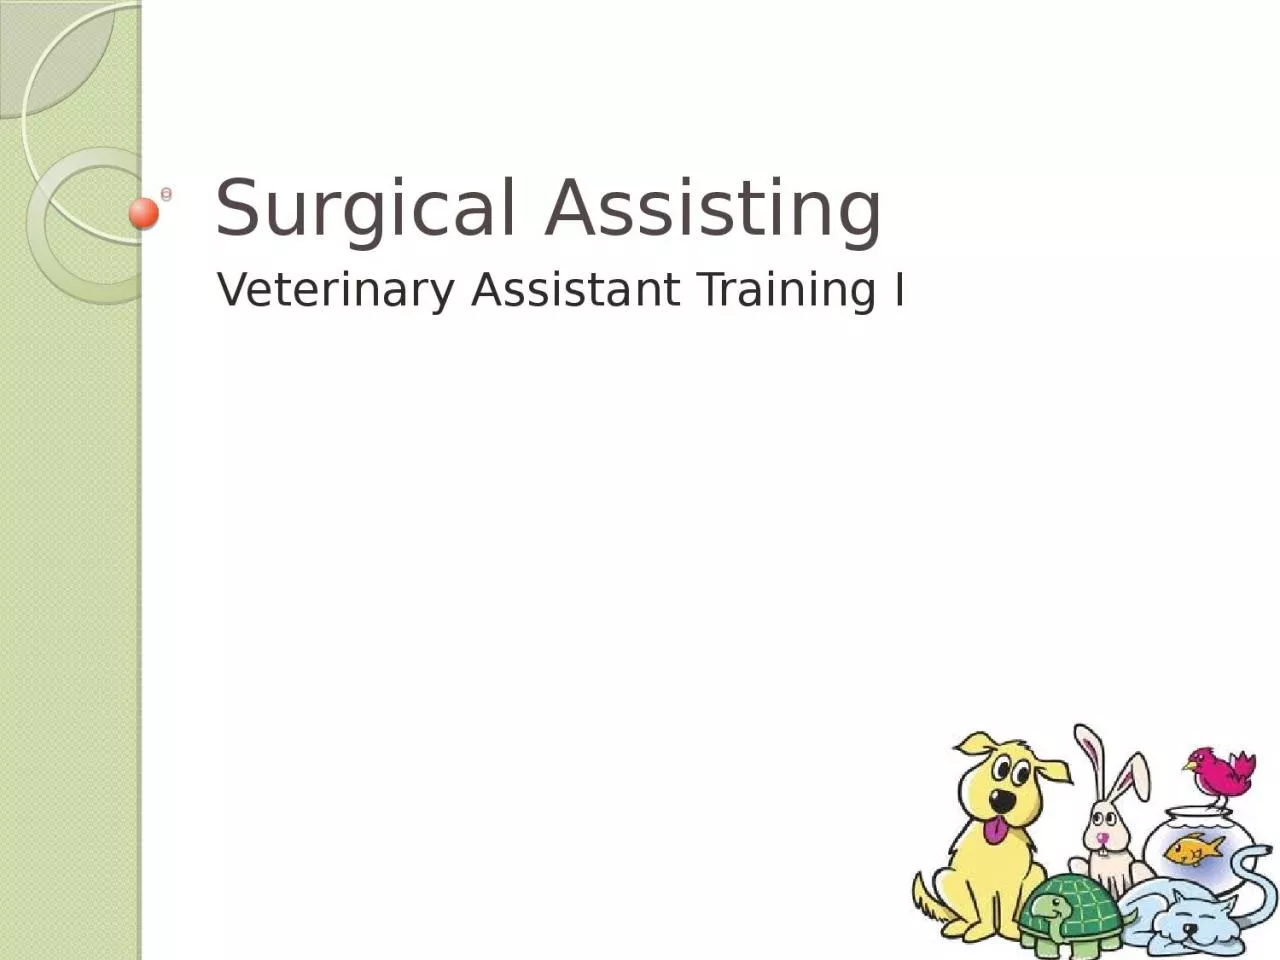 Surgical Assisting Veterinary Assistant Training I